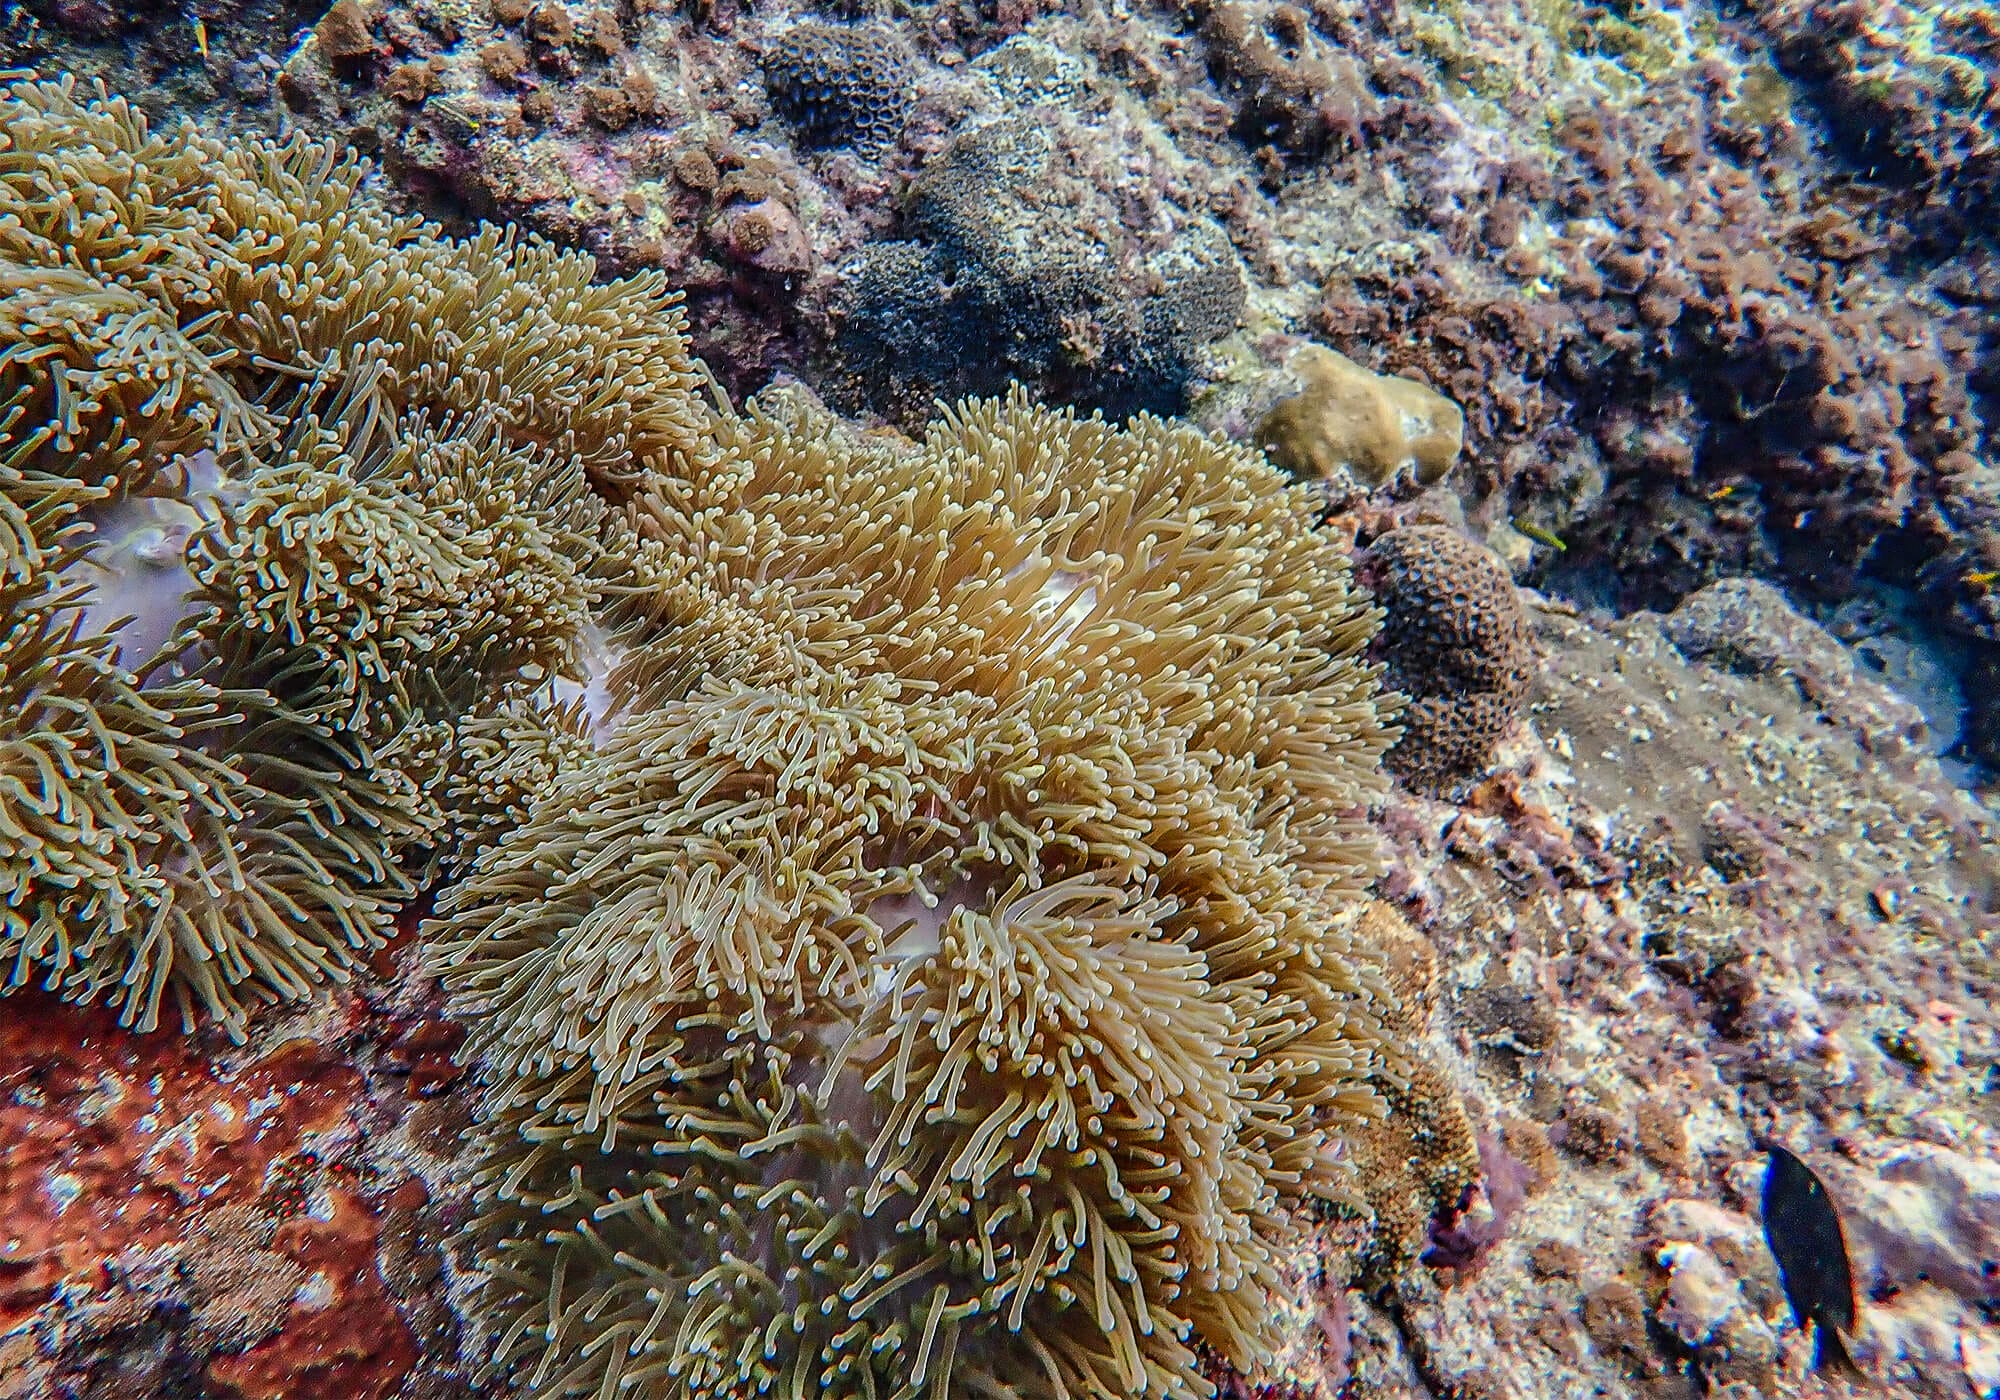 Anemone drifting in the current at Maya Bay